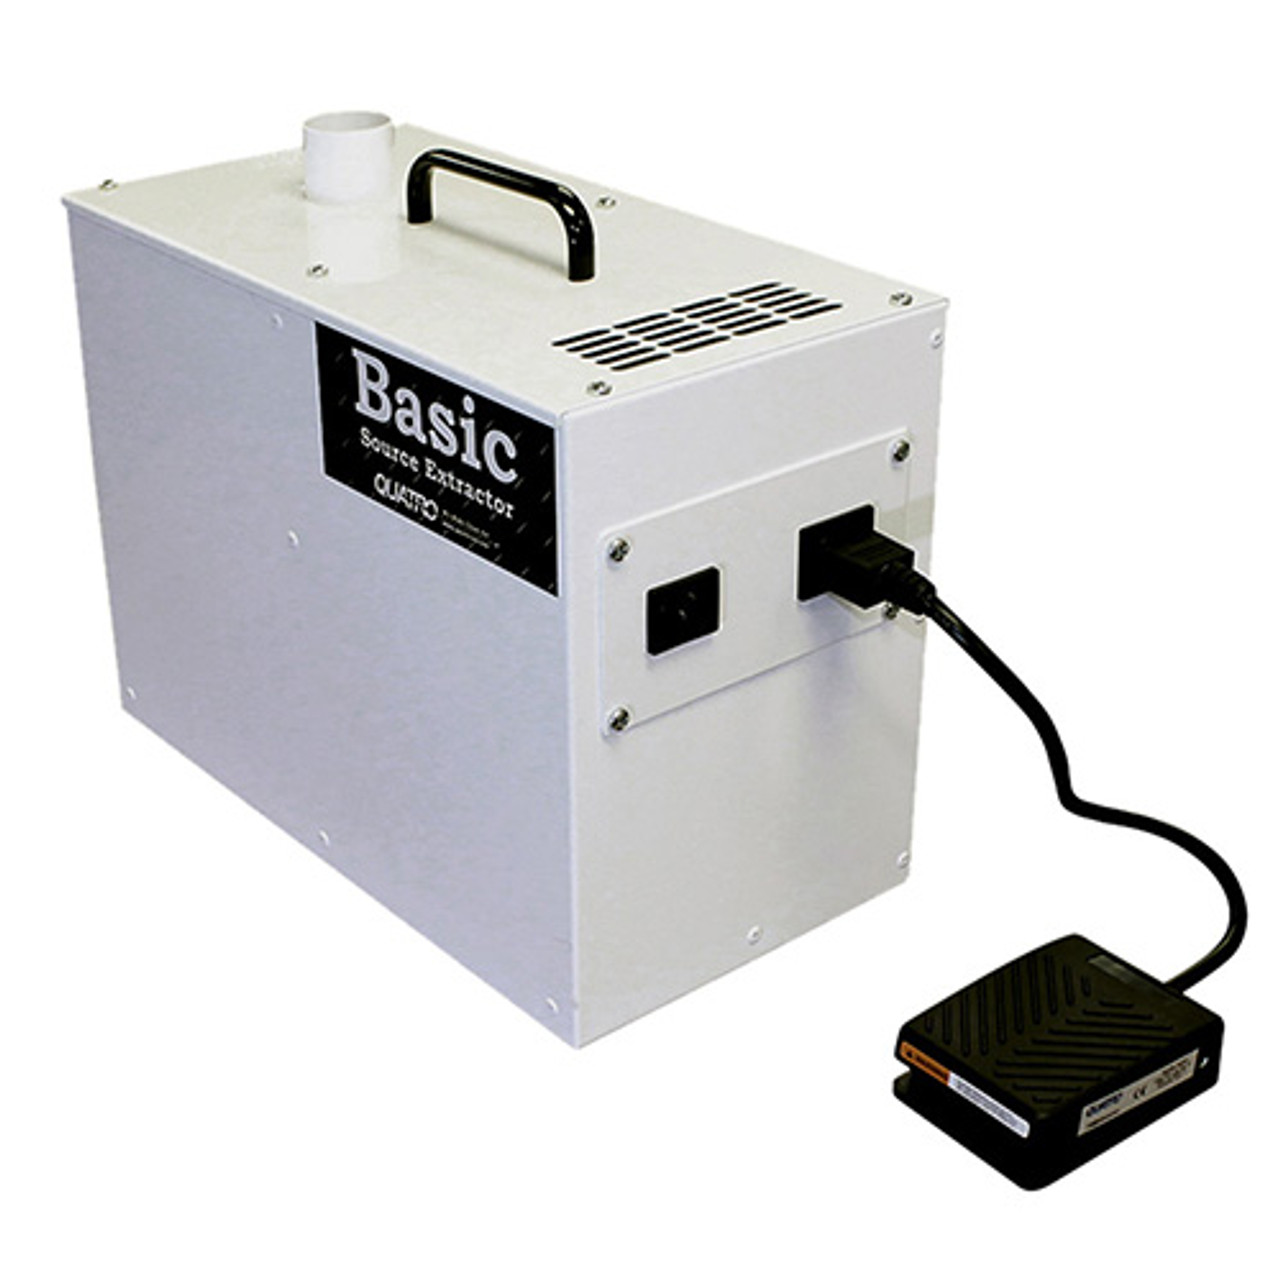 Quatro Basic Dust Collector with Foot Switch